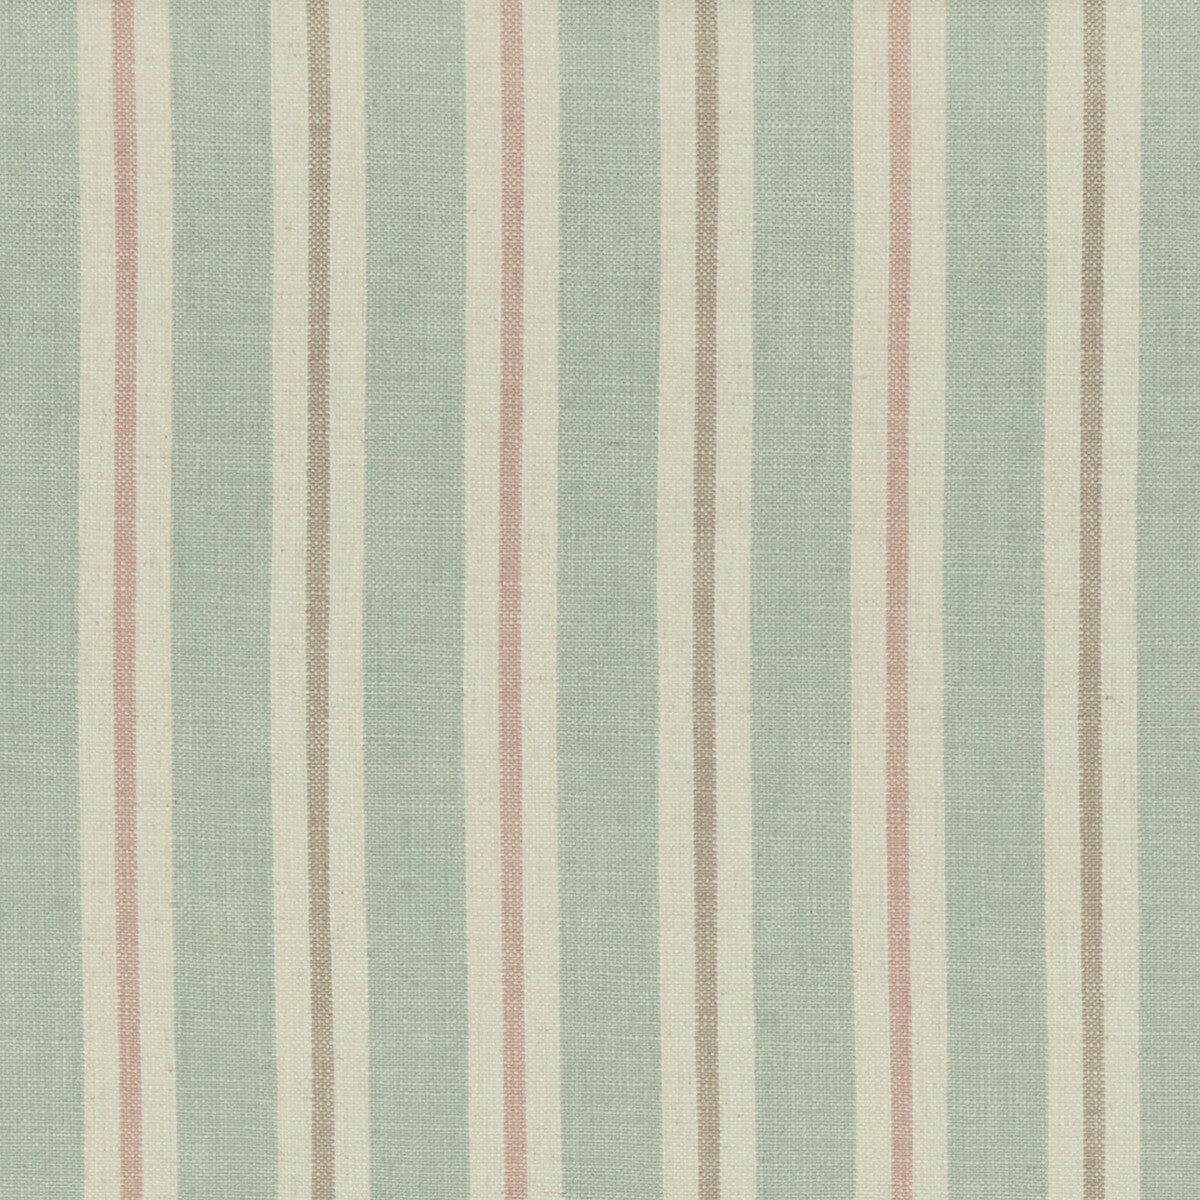 Sackville Stripe fabric in mineral/blush color - pattern F1046/05.CAC.0 - by Clarke And Clarke in the Clarke &amp; Clarke Castle Garden collection